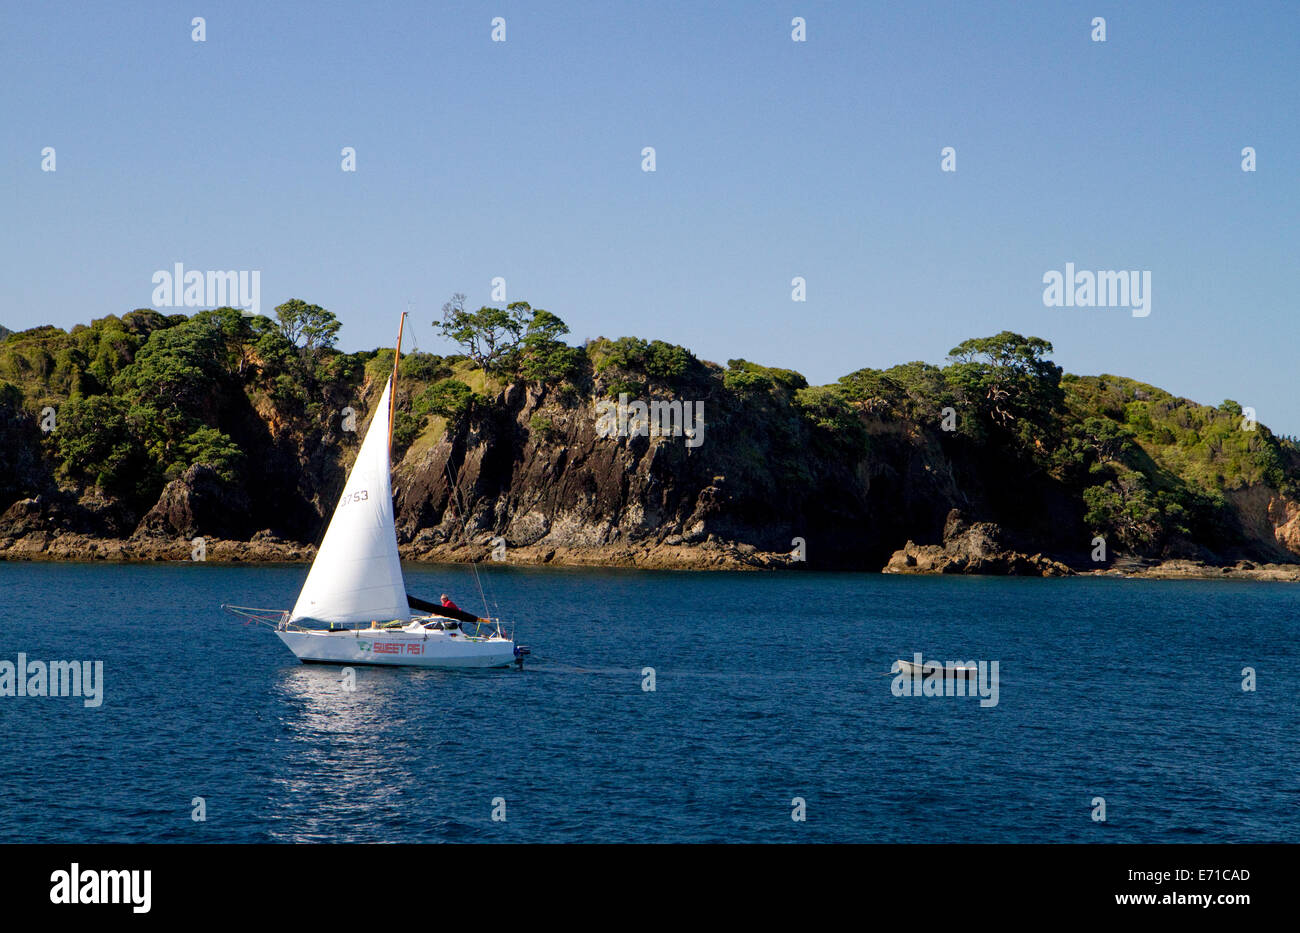 Sail boat in the Bay of Islands, North Island, New Zealand. Stock Photo